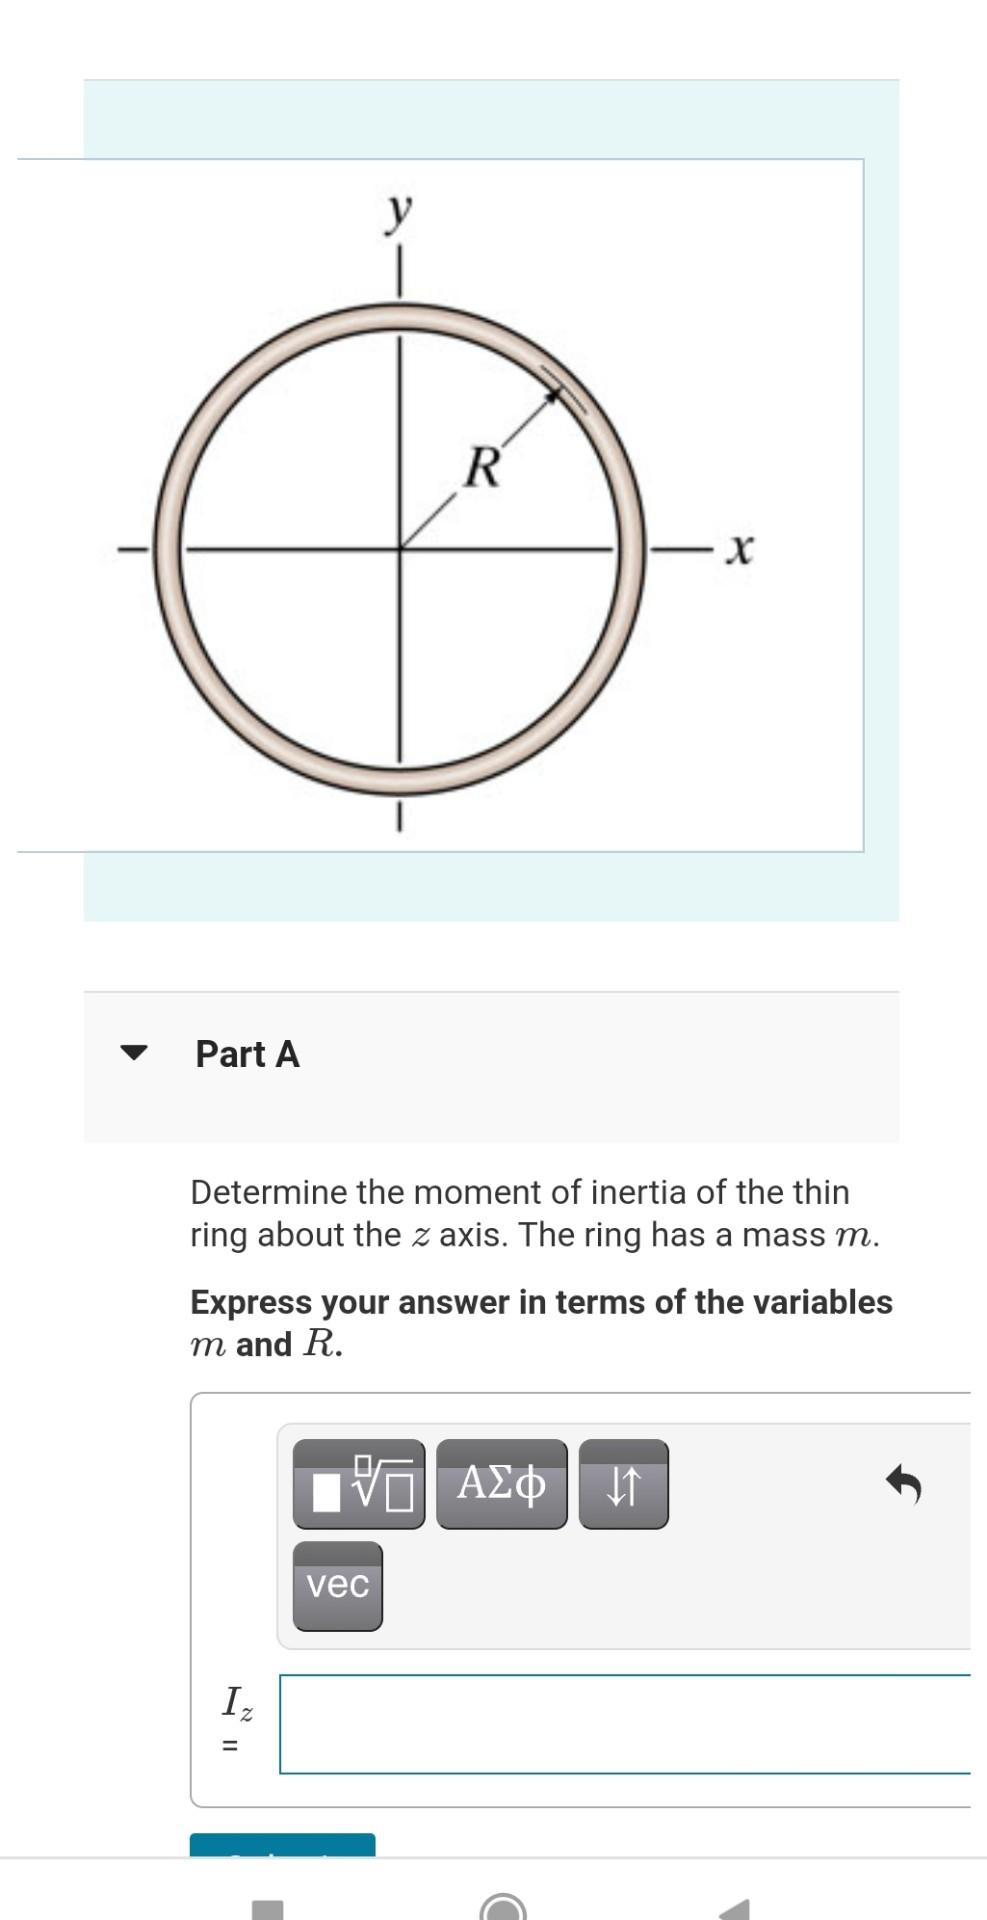 what is the moment of inertia of a ring about a †an gent to the periphery  of the ring